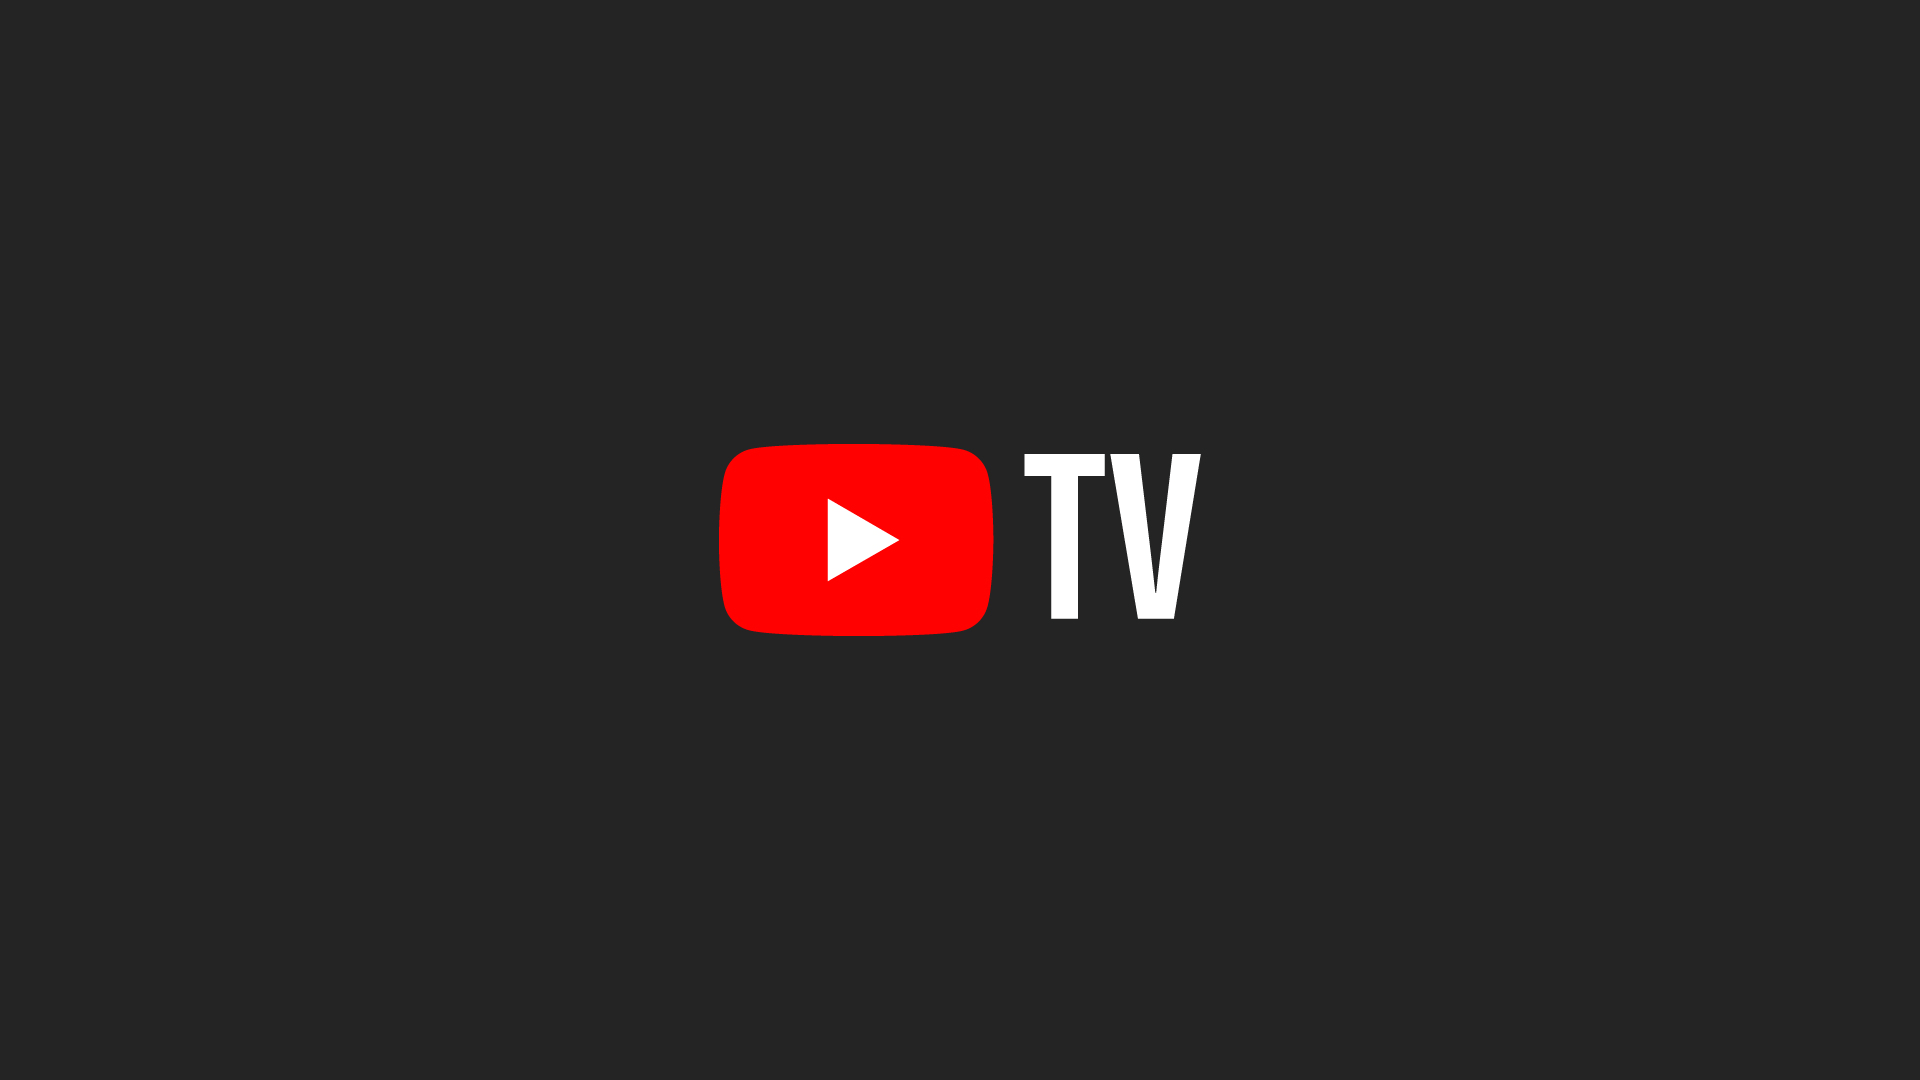 Youtube Tv 2 Week Free Trial Offer Ends This Week Cord Cutters News